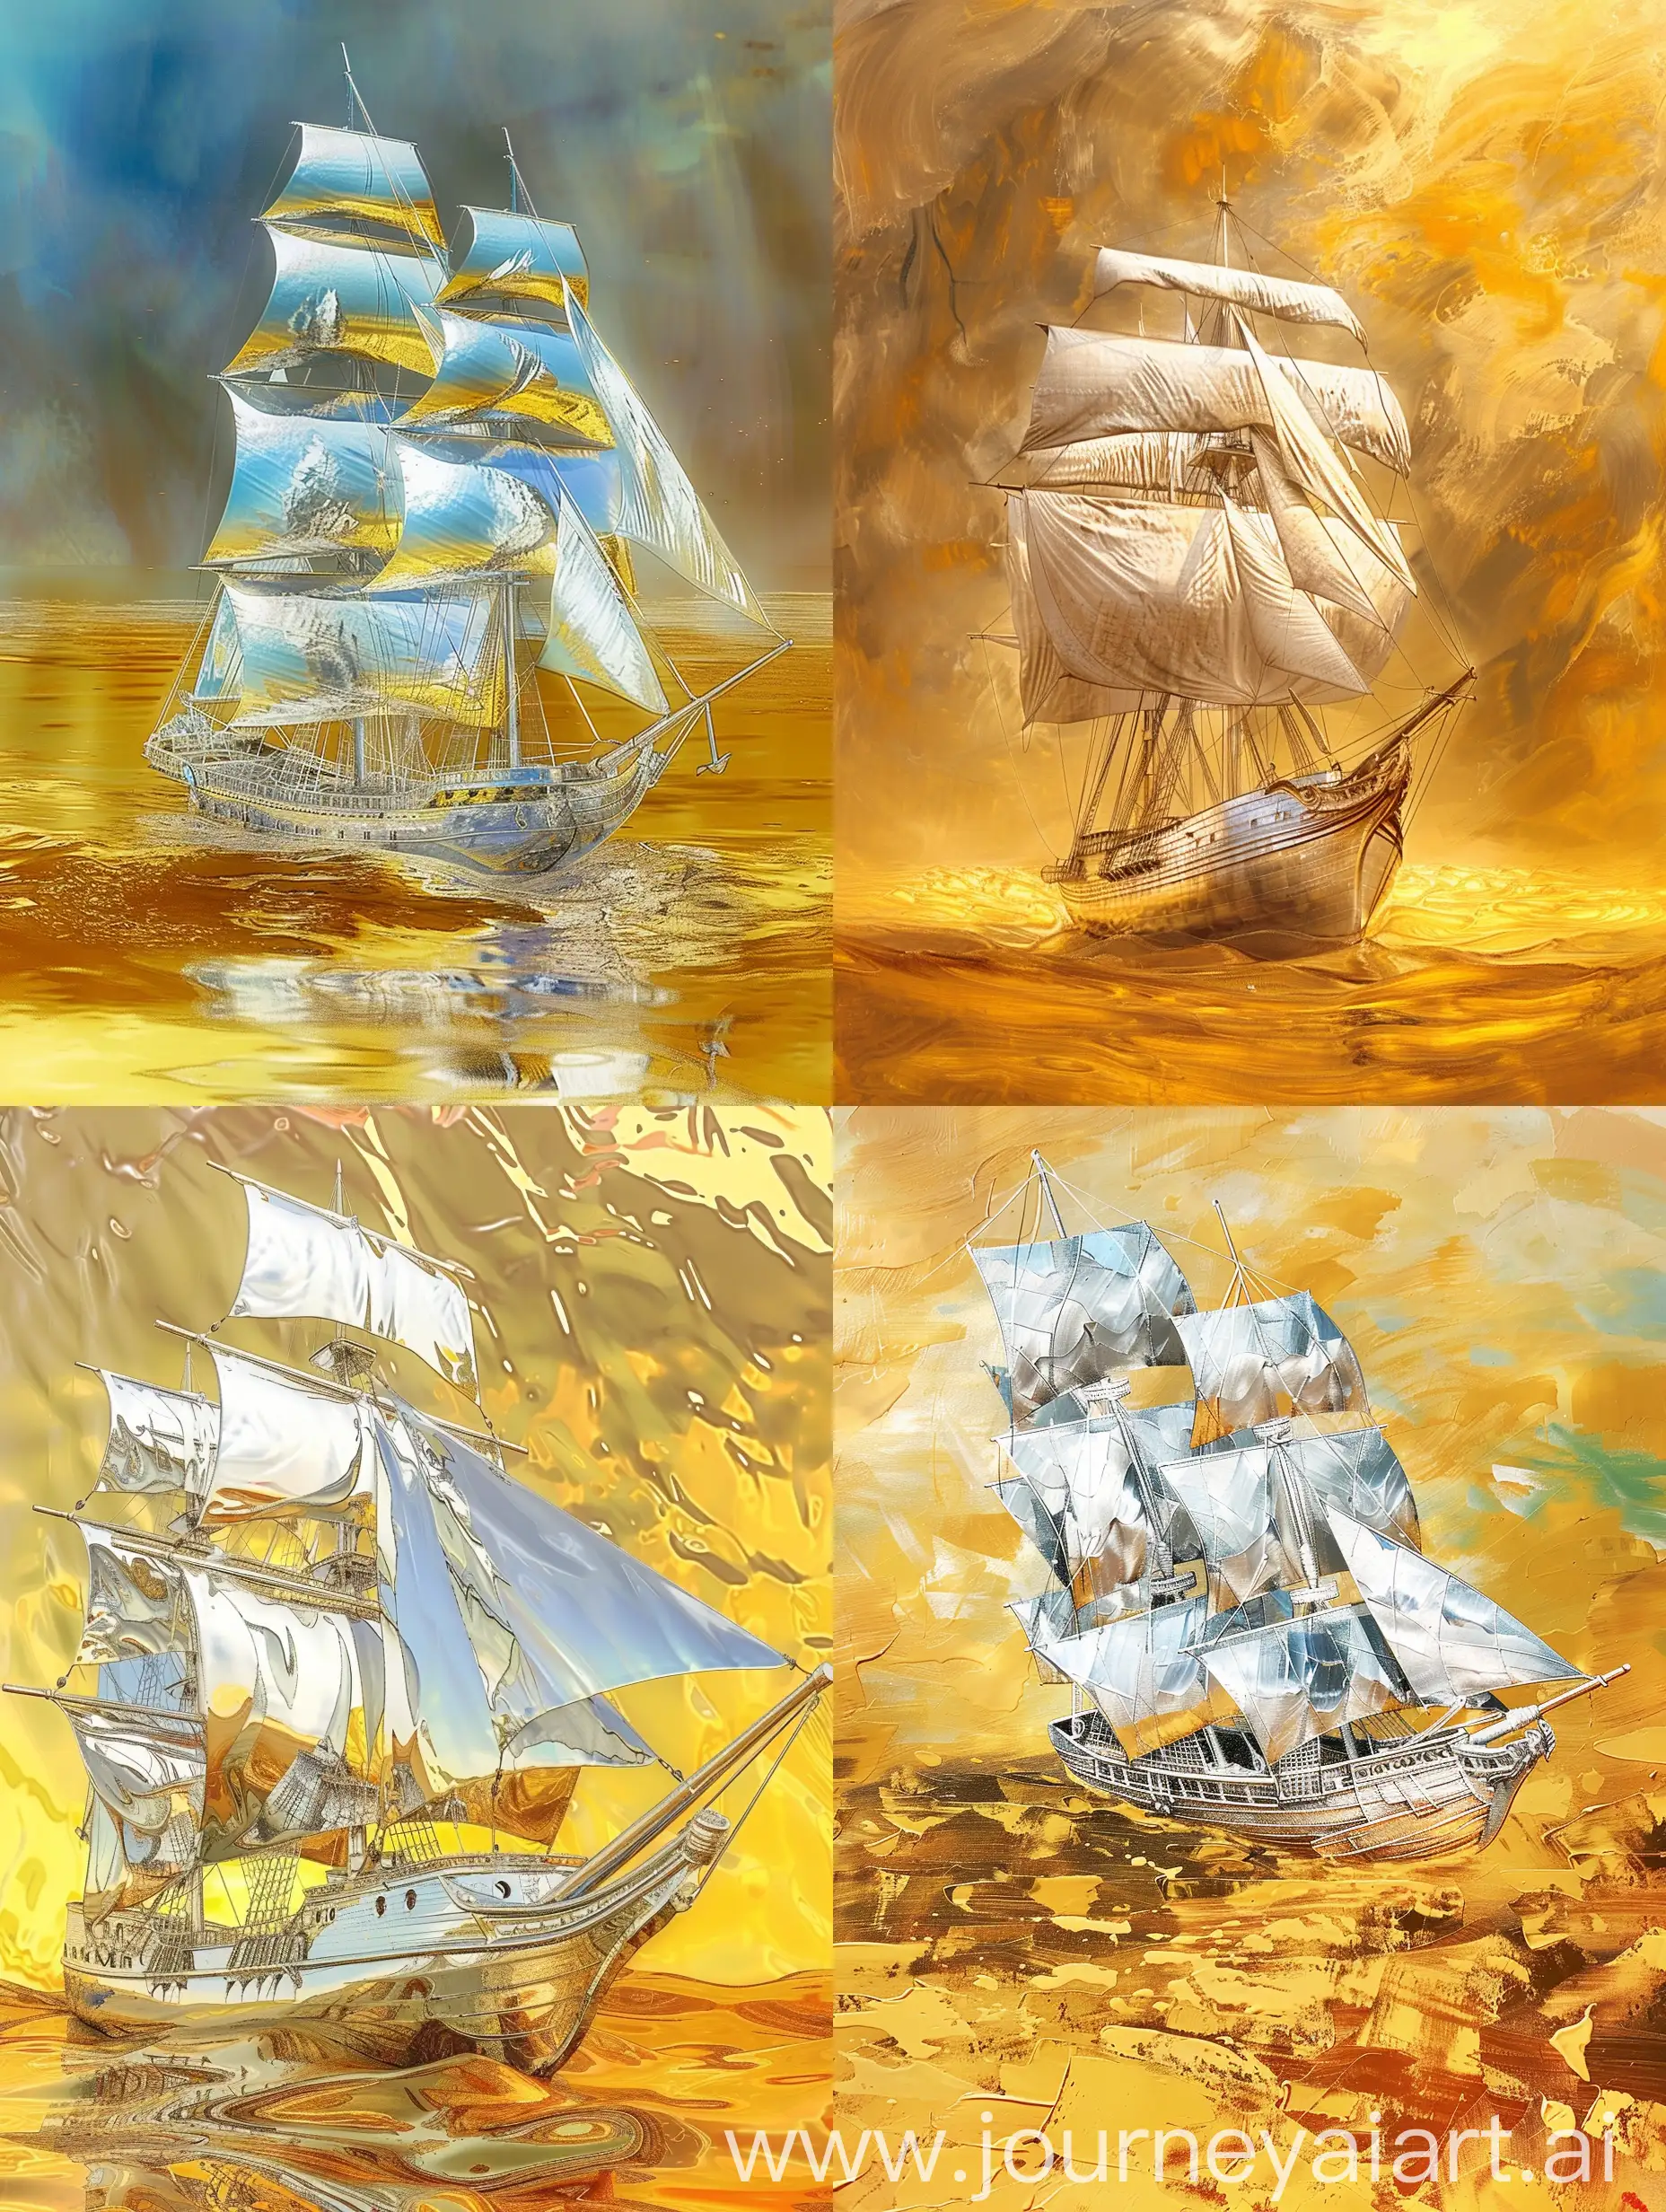 a polychromatic silver ship at full sail on a golden/yellow ocean